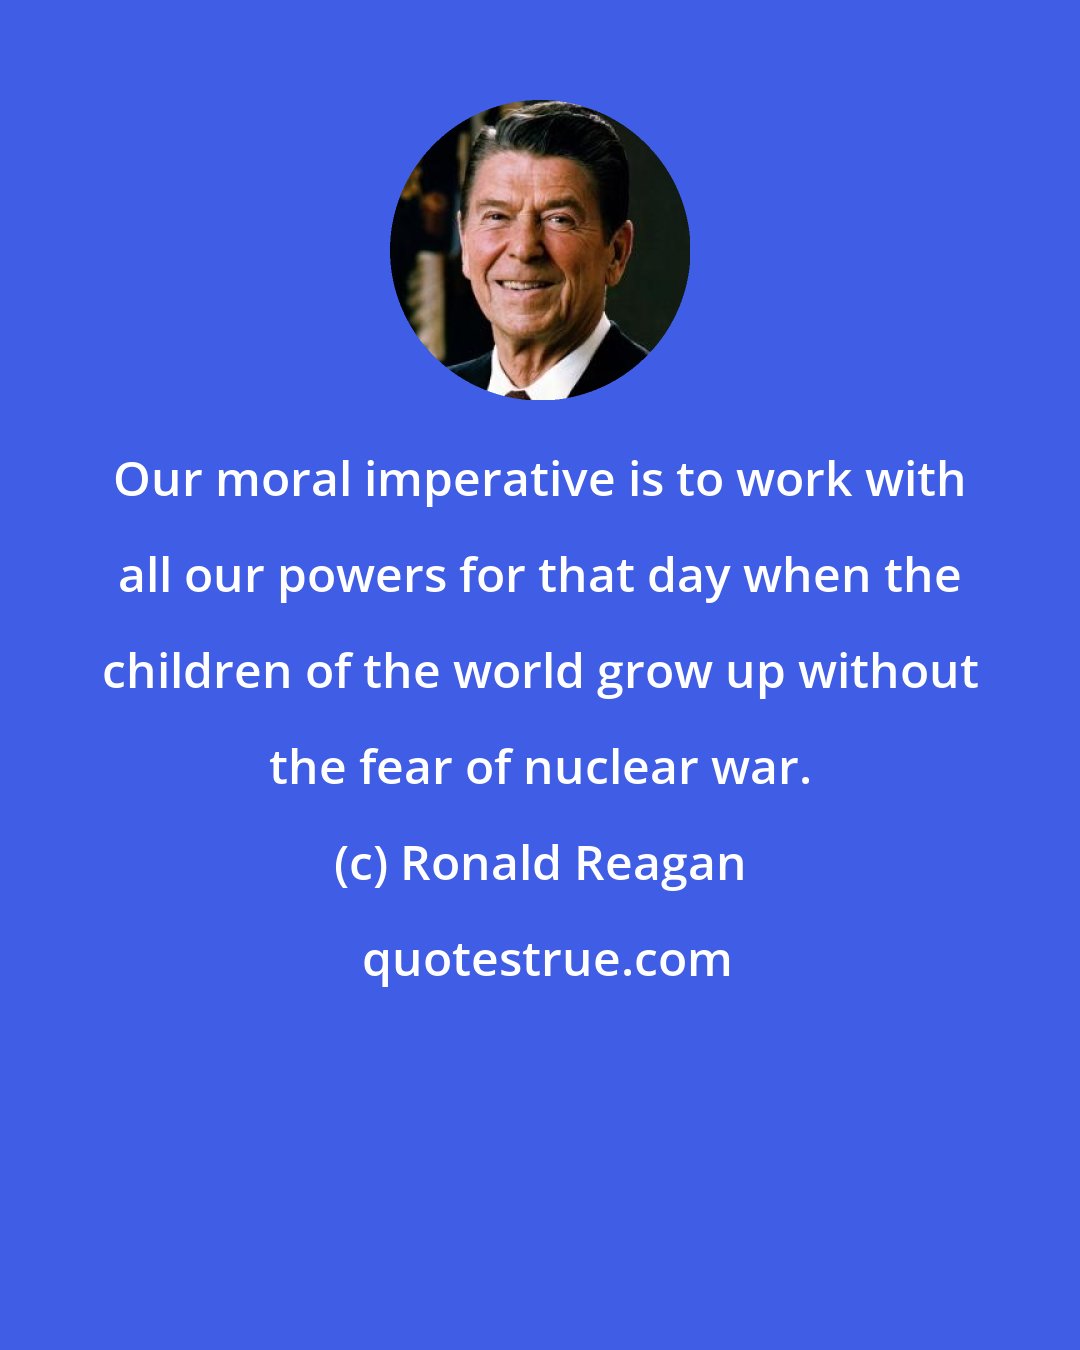 Ronald Reagan: Our moral imperative is to work with all our powers for that day when the children of the world grow up without the fear of nuclear war.